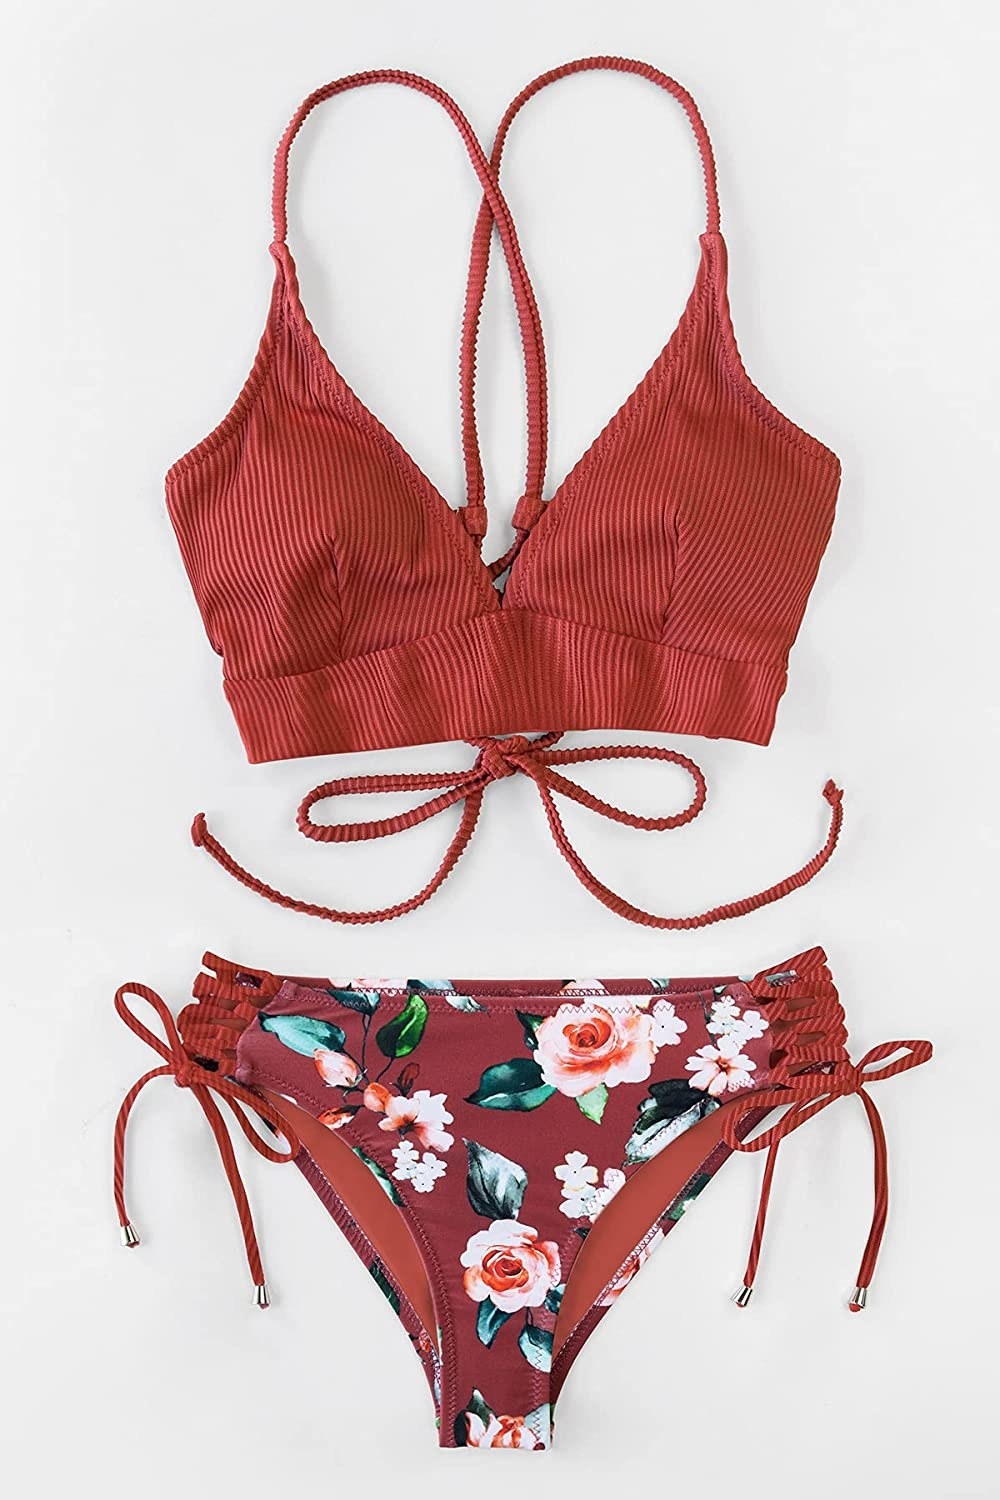 the red bikini top and floral bottom